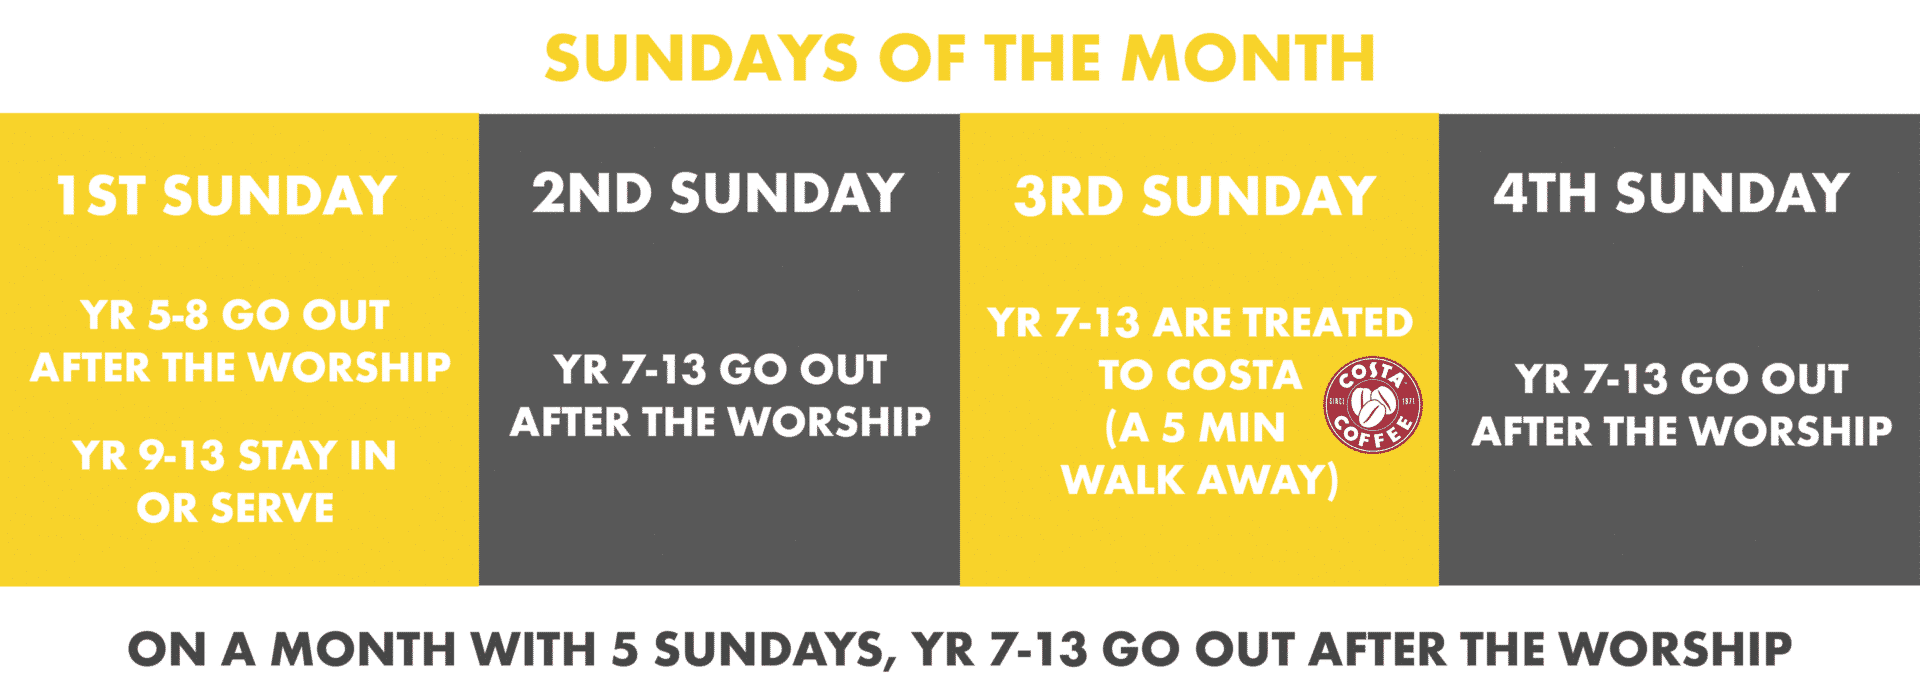 Sundays of the Month 2 e1651581405115 - YOUTH